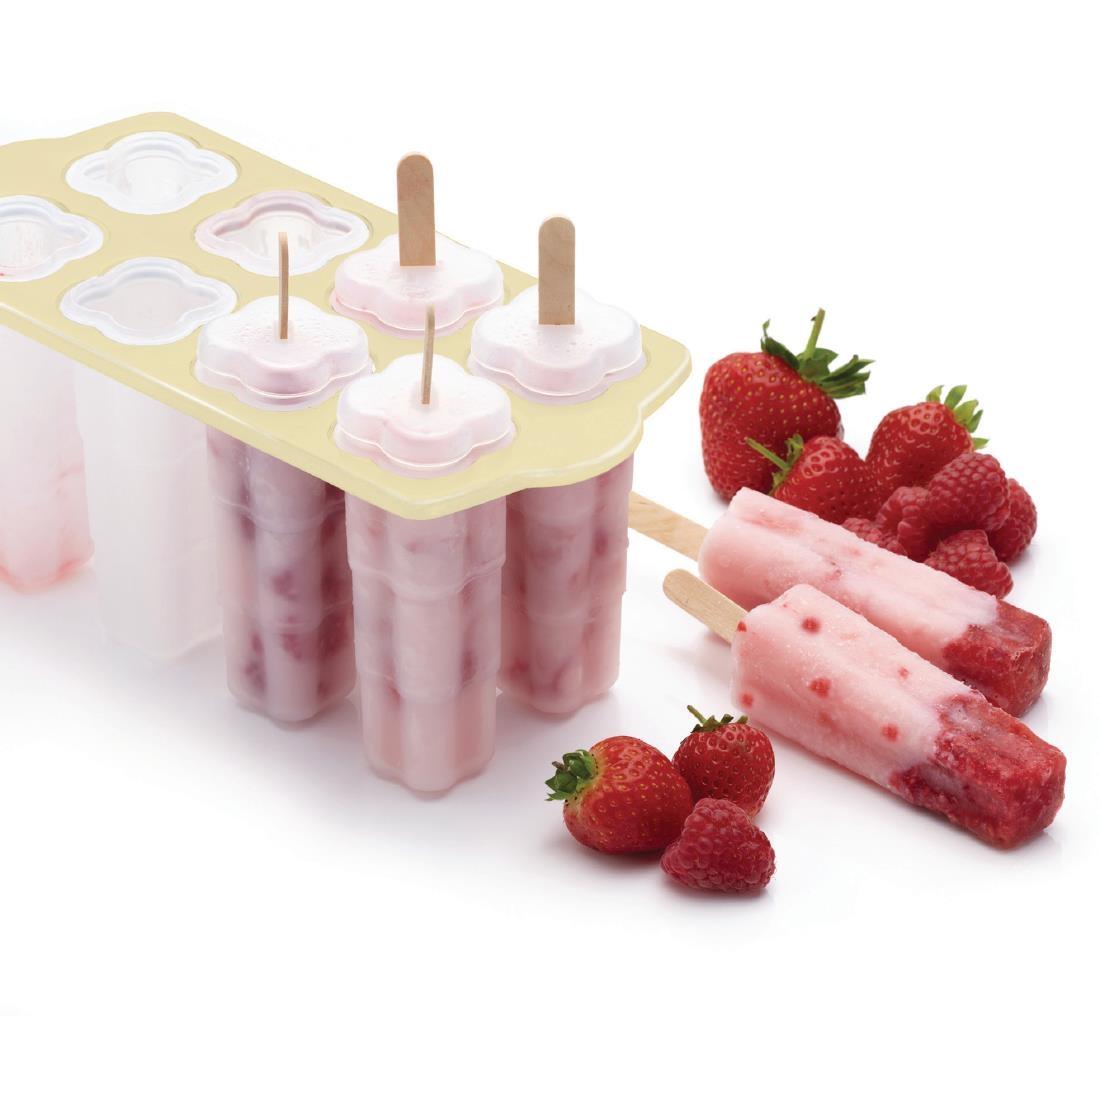 Kitchen Craft Deluxe Lolly Maker 8 Mould - CS130  - 2